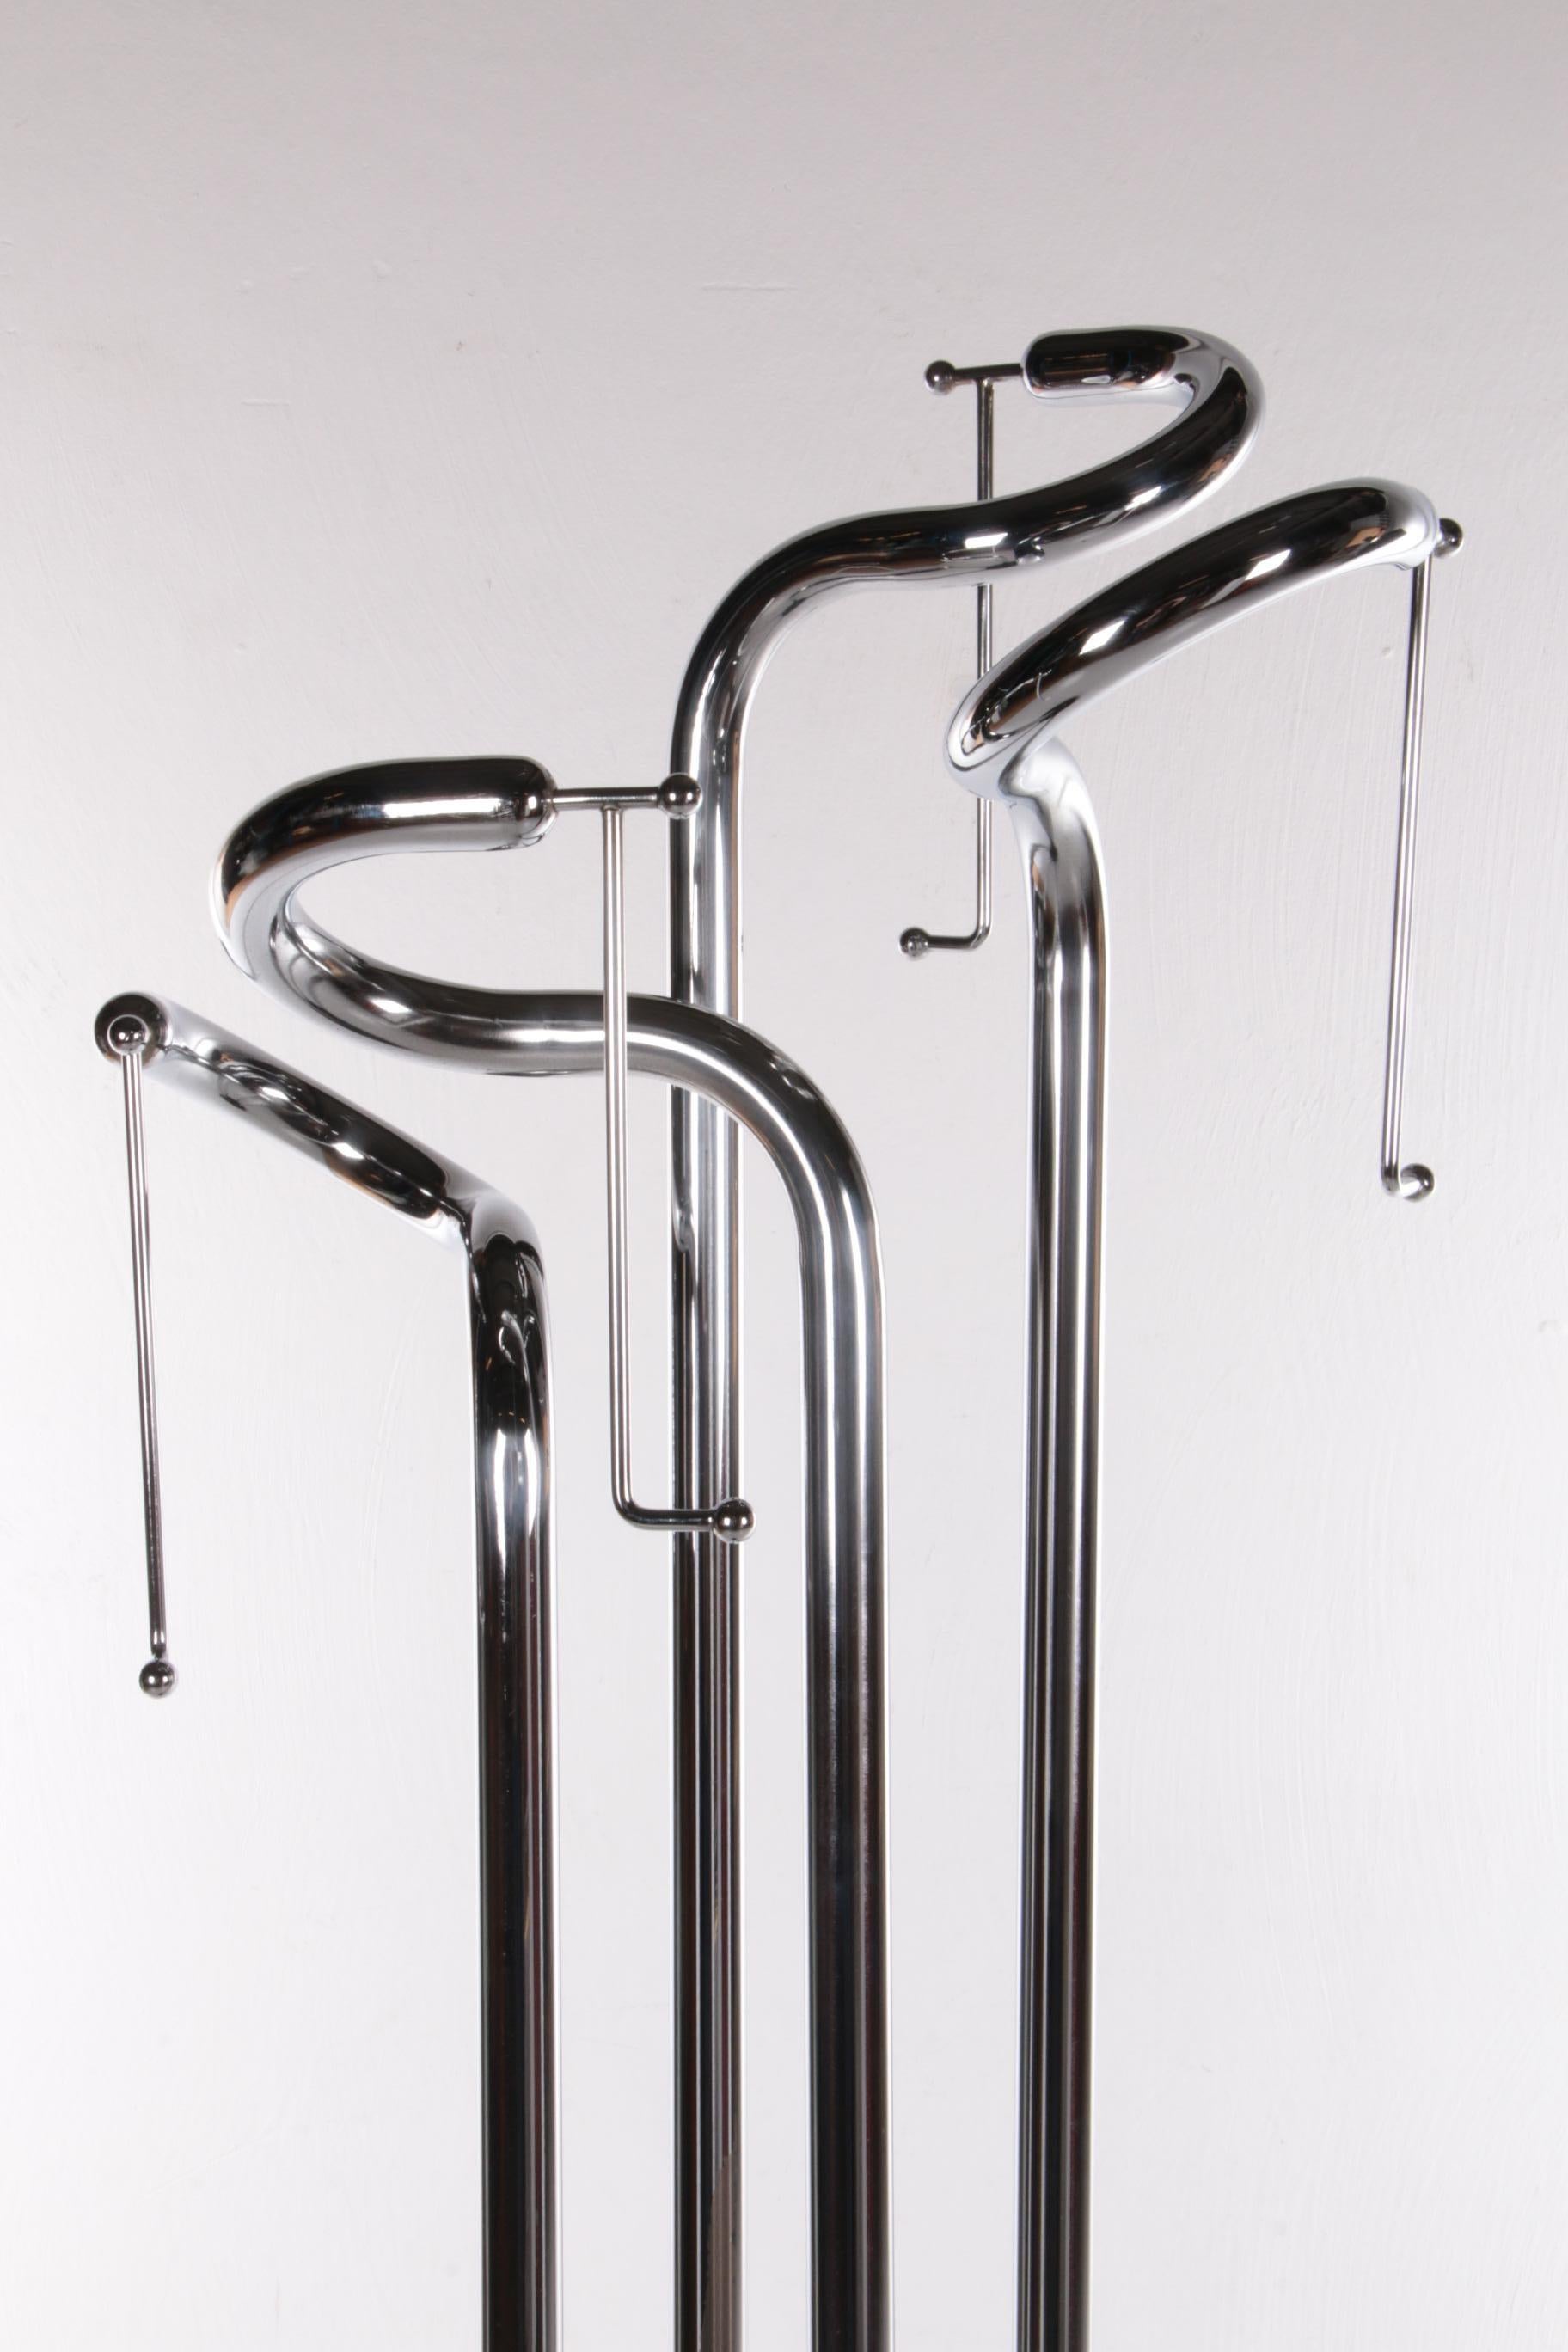 This is a very special model coat rack mounted on a round lacquered wooden base.

Four beautiful heavy chrome tubes are attached to it, each with a thin spout that ends in a ball. The silver metal gives the coat rack a modern and elegant